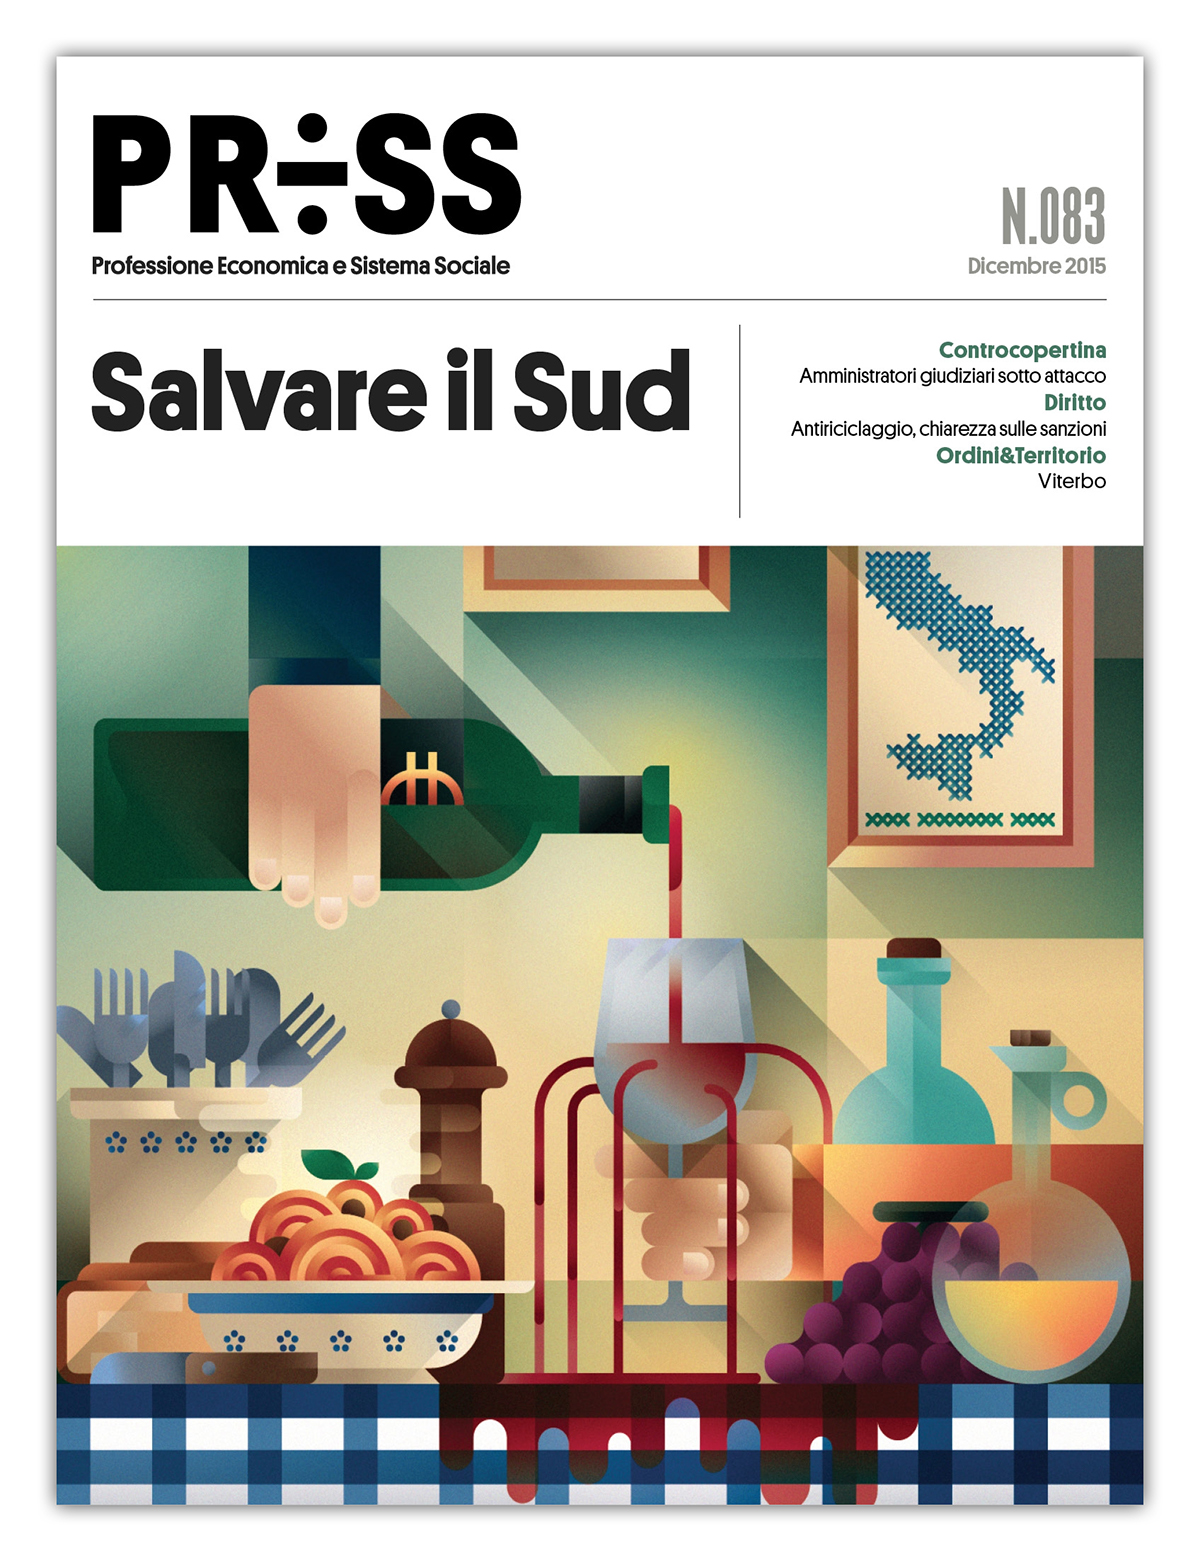 Magazine cover with a metaphoric scene of southern Italy wasting european funds, illustration by Francesco Faggiano illustrator